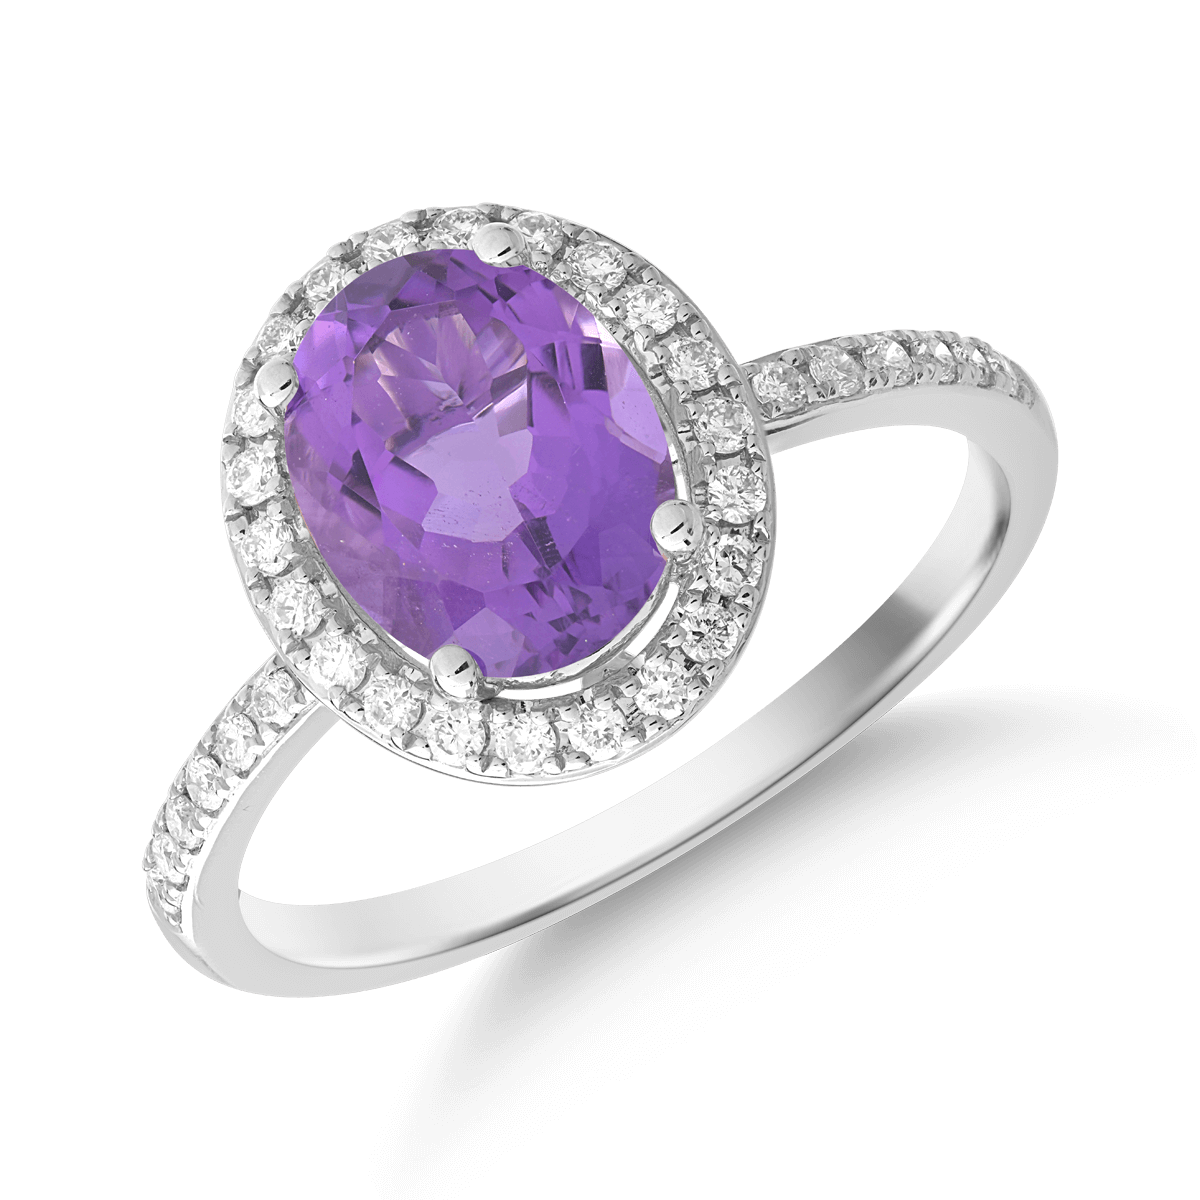 18K white gold ring with 2.15ct amethyst and 0.26ct diamonds